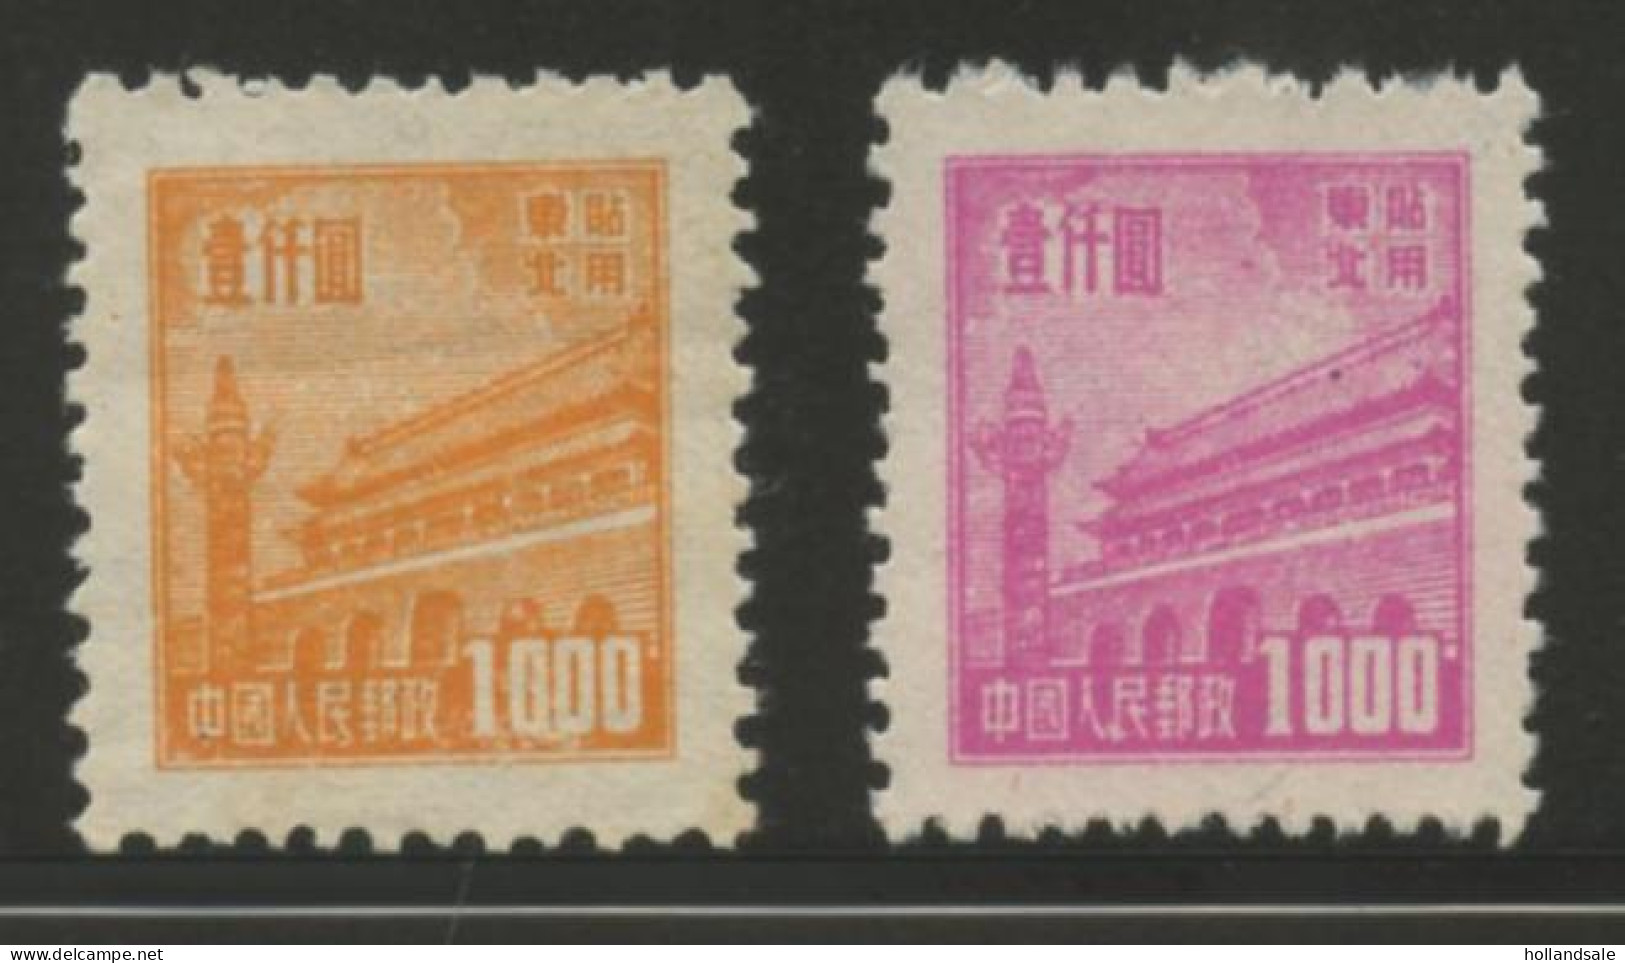 CHINA NORTH EAST - 1950 2x $1000 Tien An Men Stamps From RN1. Unused. MICHEL # 163-164. - Nordostchina 1946-48